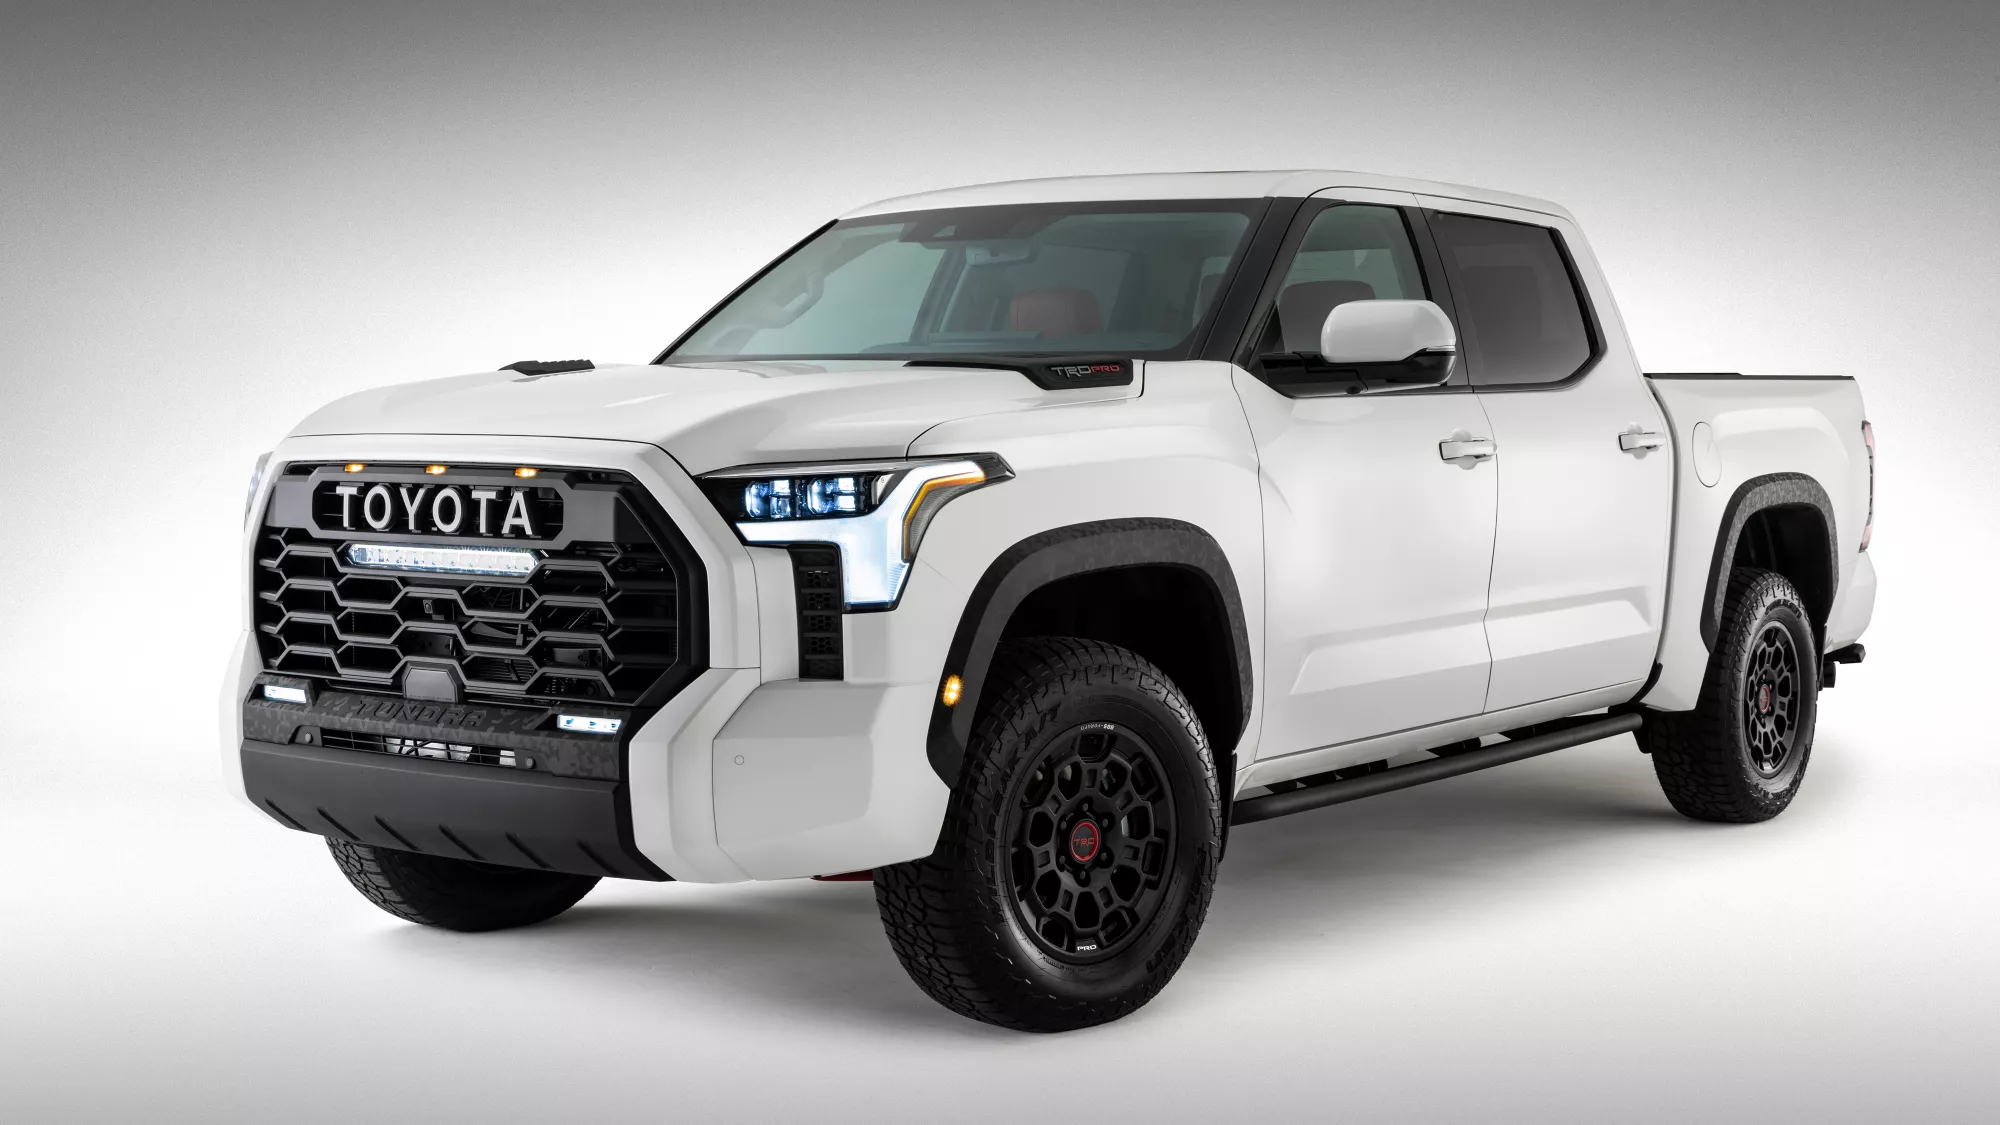 A new image of the 2022 Toyota Tundra